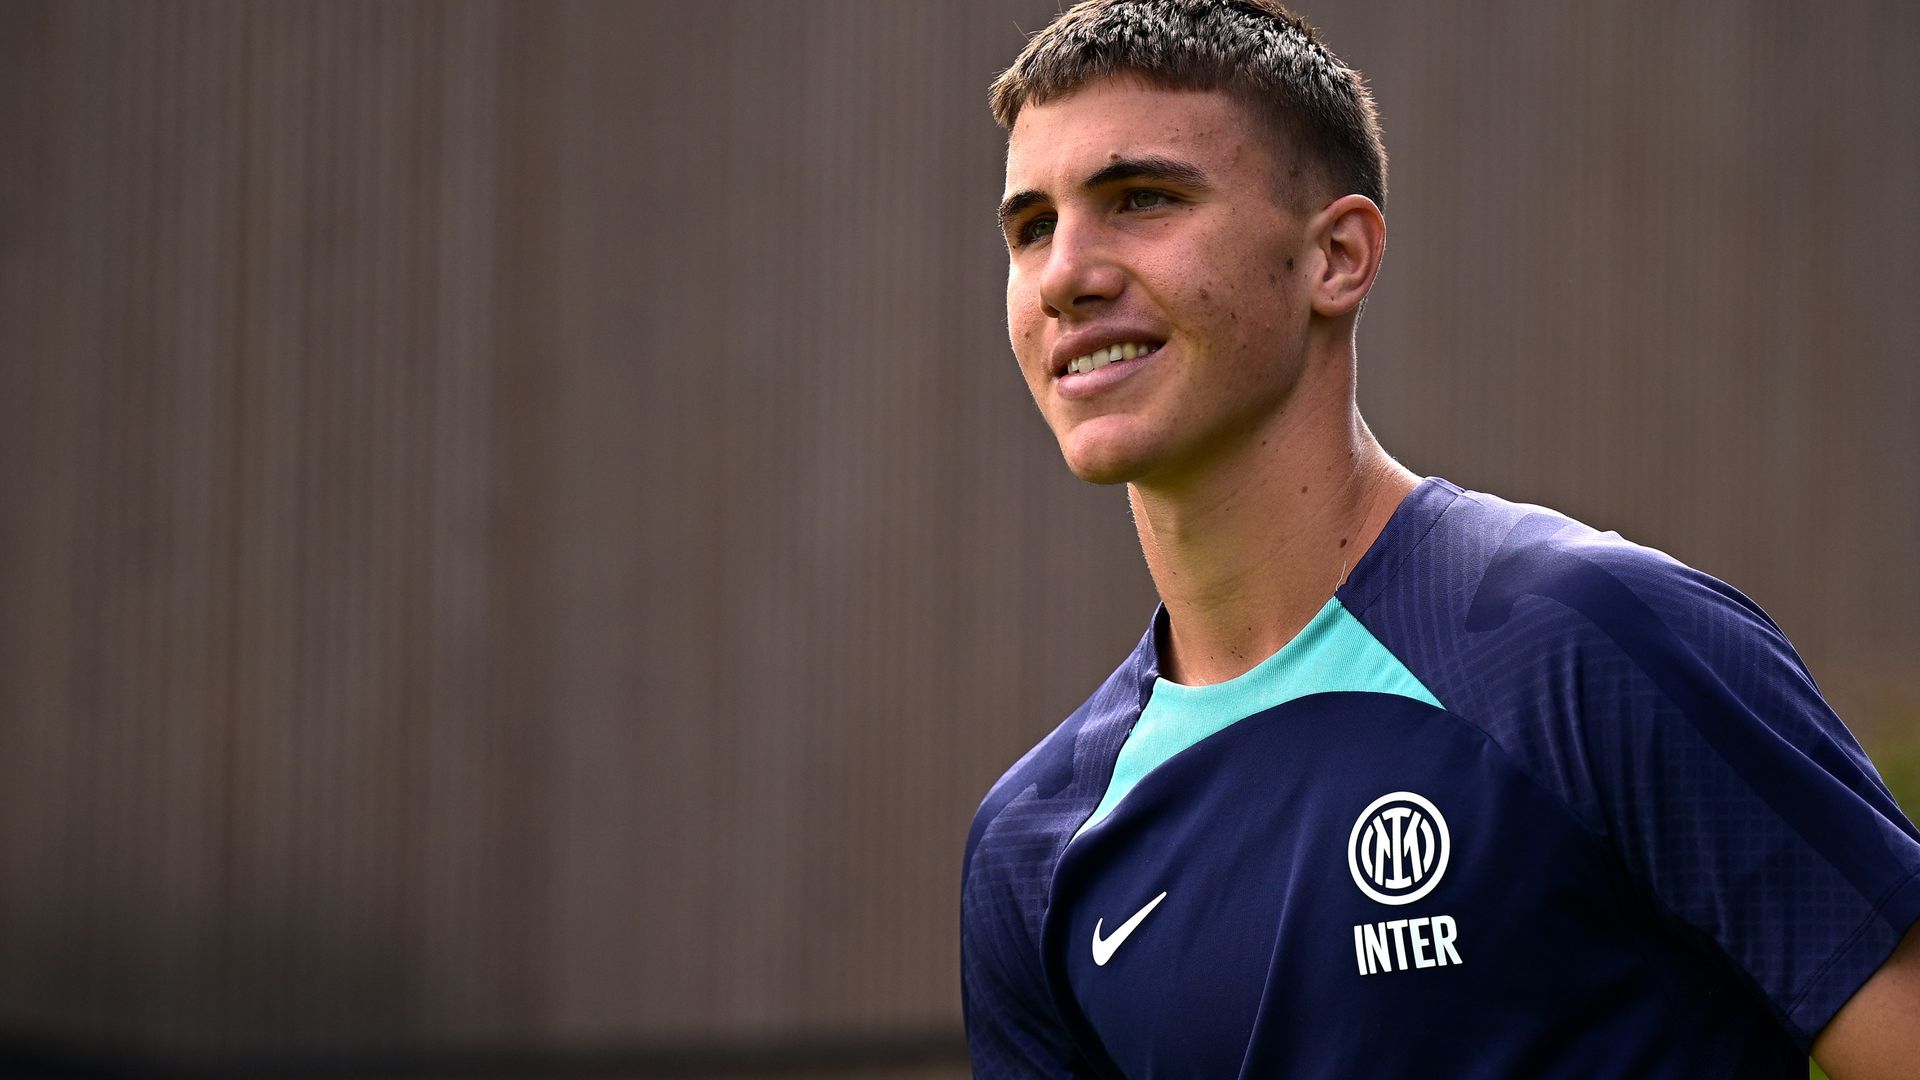 Chelsea sign Italian youngster Casadei from Inter Milan